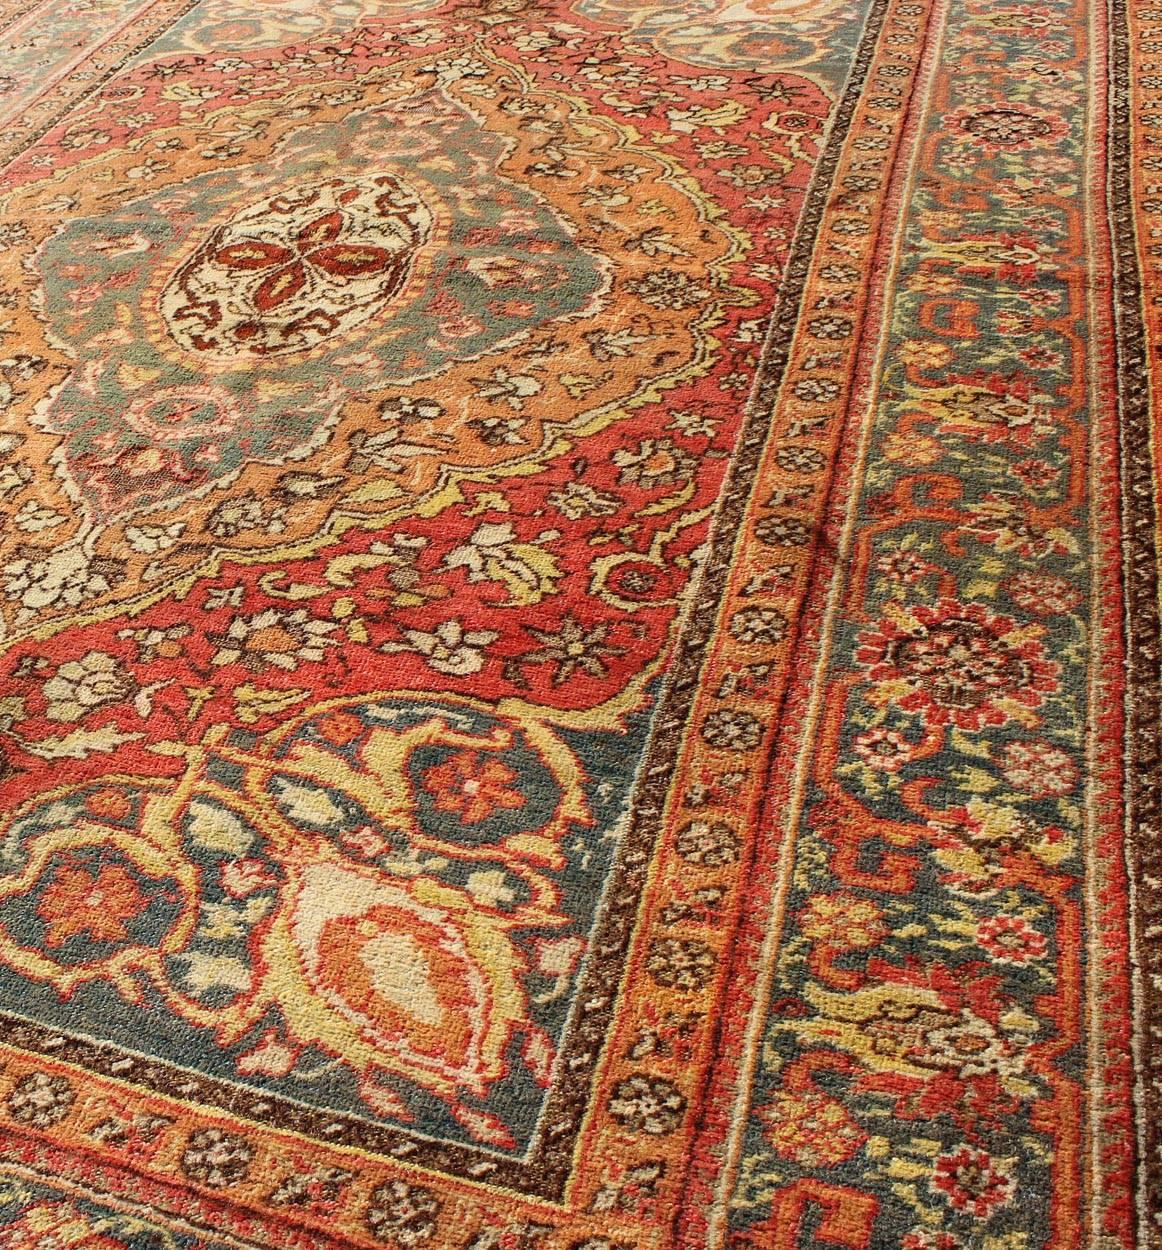 Antique Turkish Sivas Rug with Multi-Layered Medallion in Red, Teal & Orange In Excellent Condition For Sale In Atlanta, GA